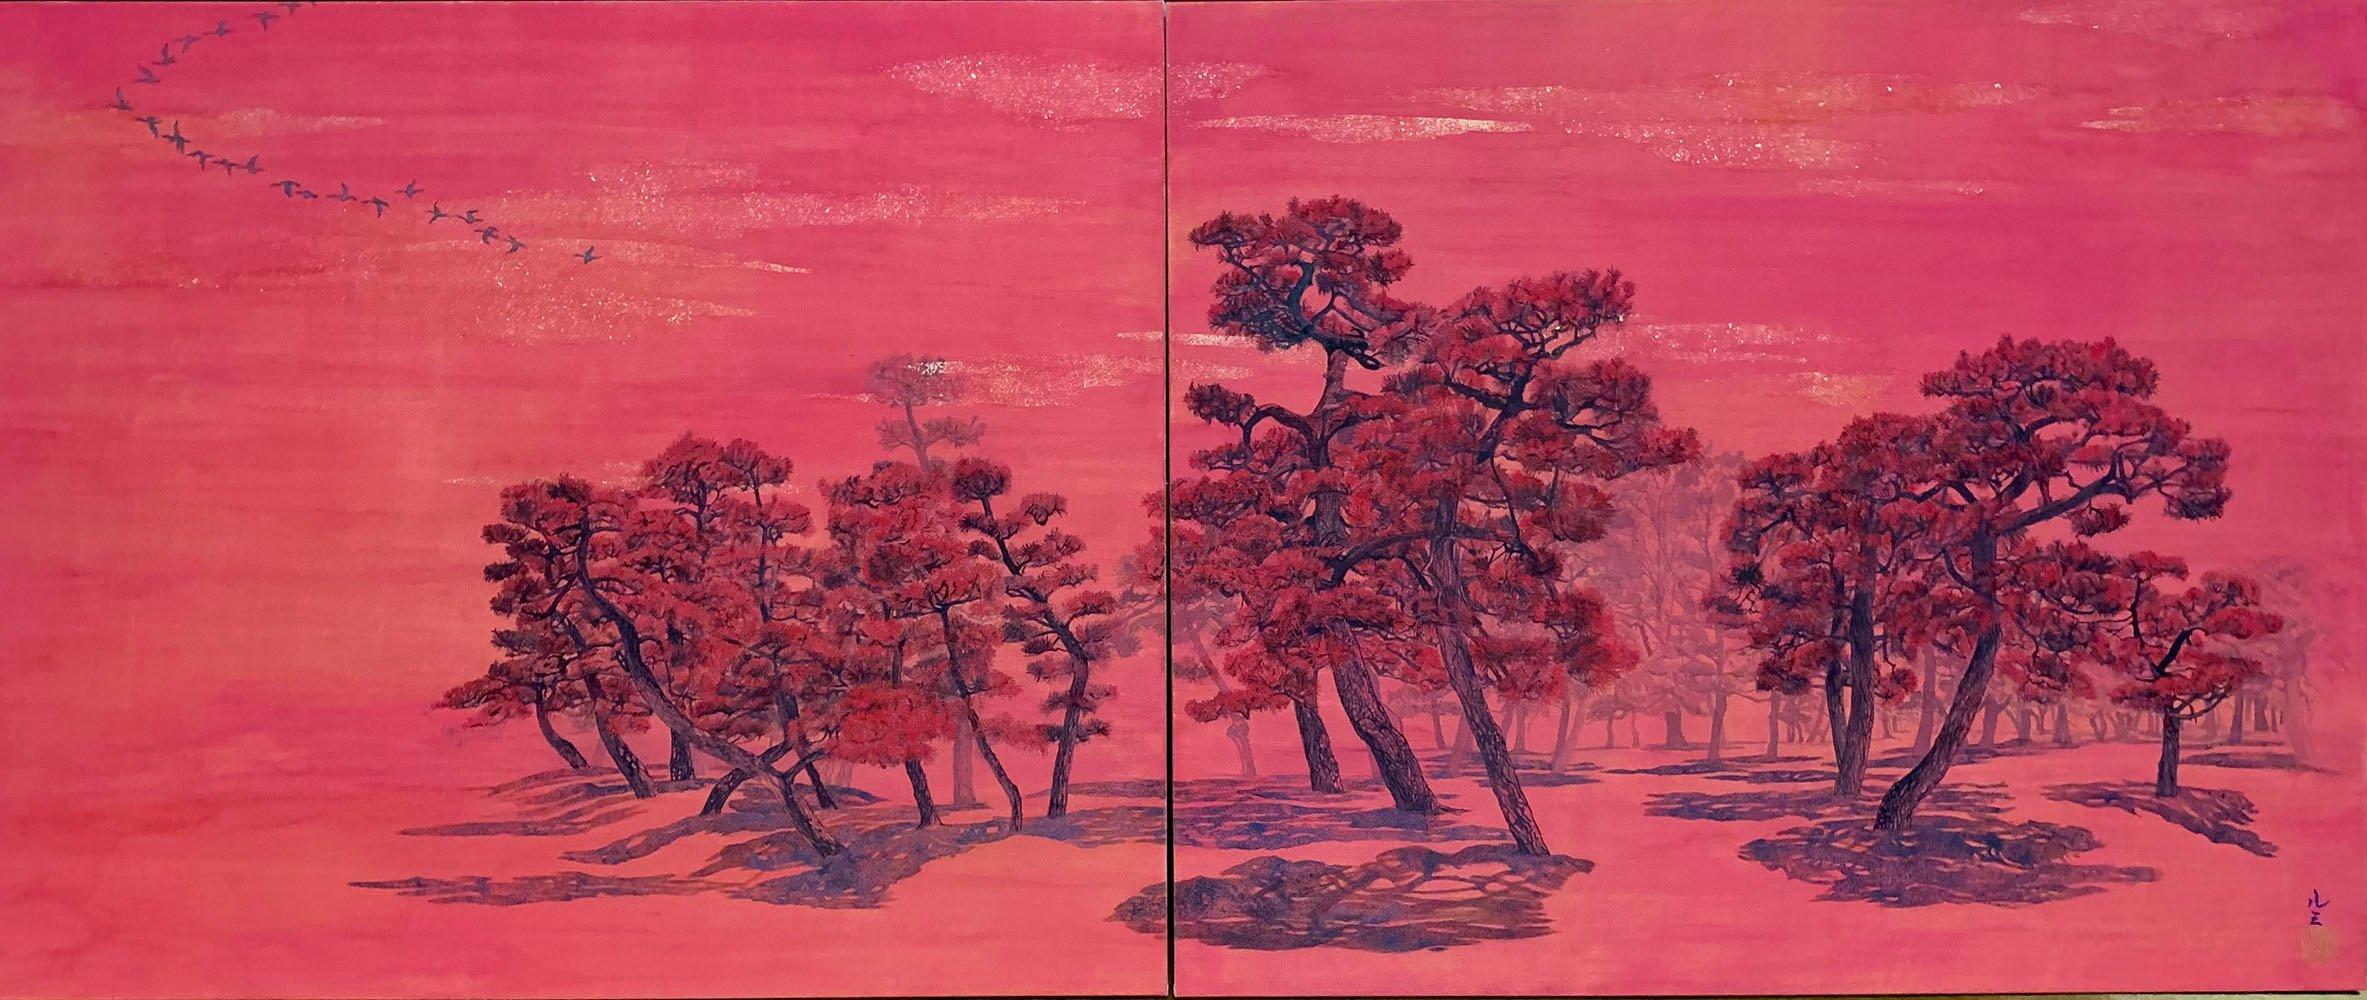 Chatty Trees II - Pines and Migrant Birds, diptych painting by French-Japanese contemporary artist Lumi Mizutani. 
Pigments, Indian ink and gold leaf on Japanese paper mounted on panel, 60.6 cm x 145.4 cm // 23.85 in. x 57.24 in.
In this series of